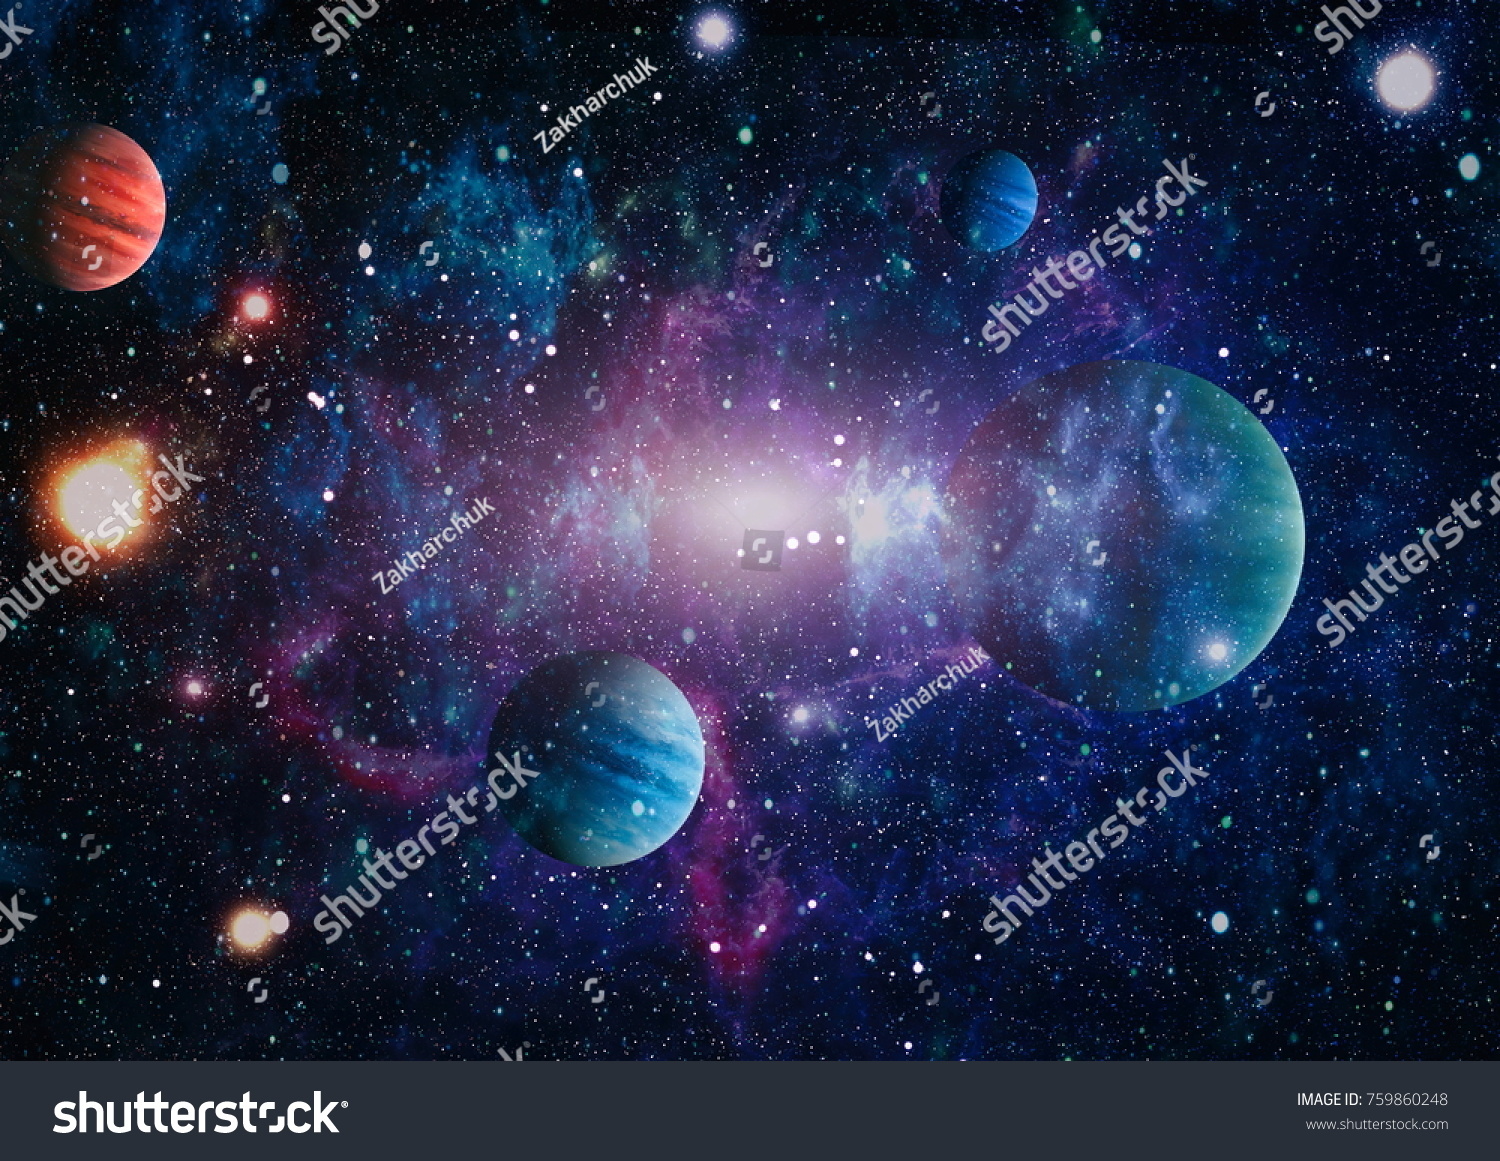 planets, stars and galaxies in outer space showing the beauty of space exploration. Elements furnished by NASA . #759860248